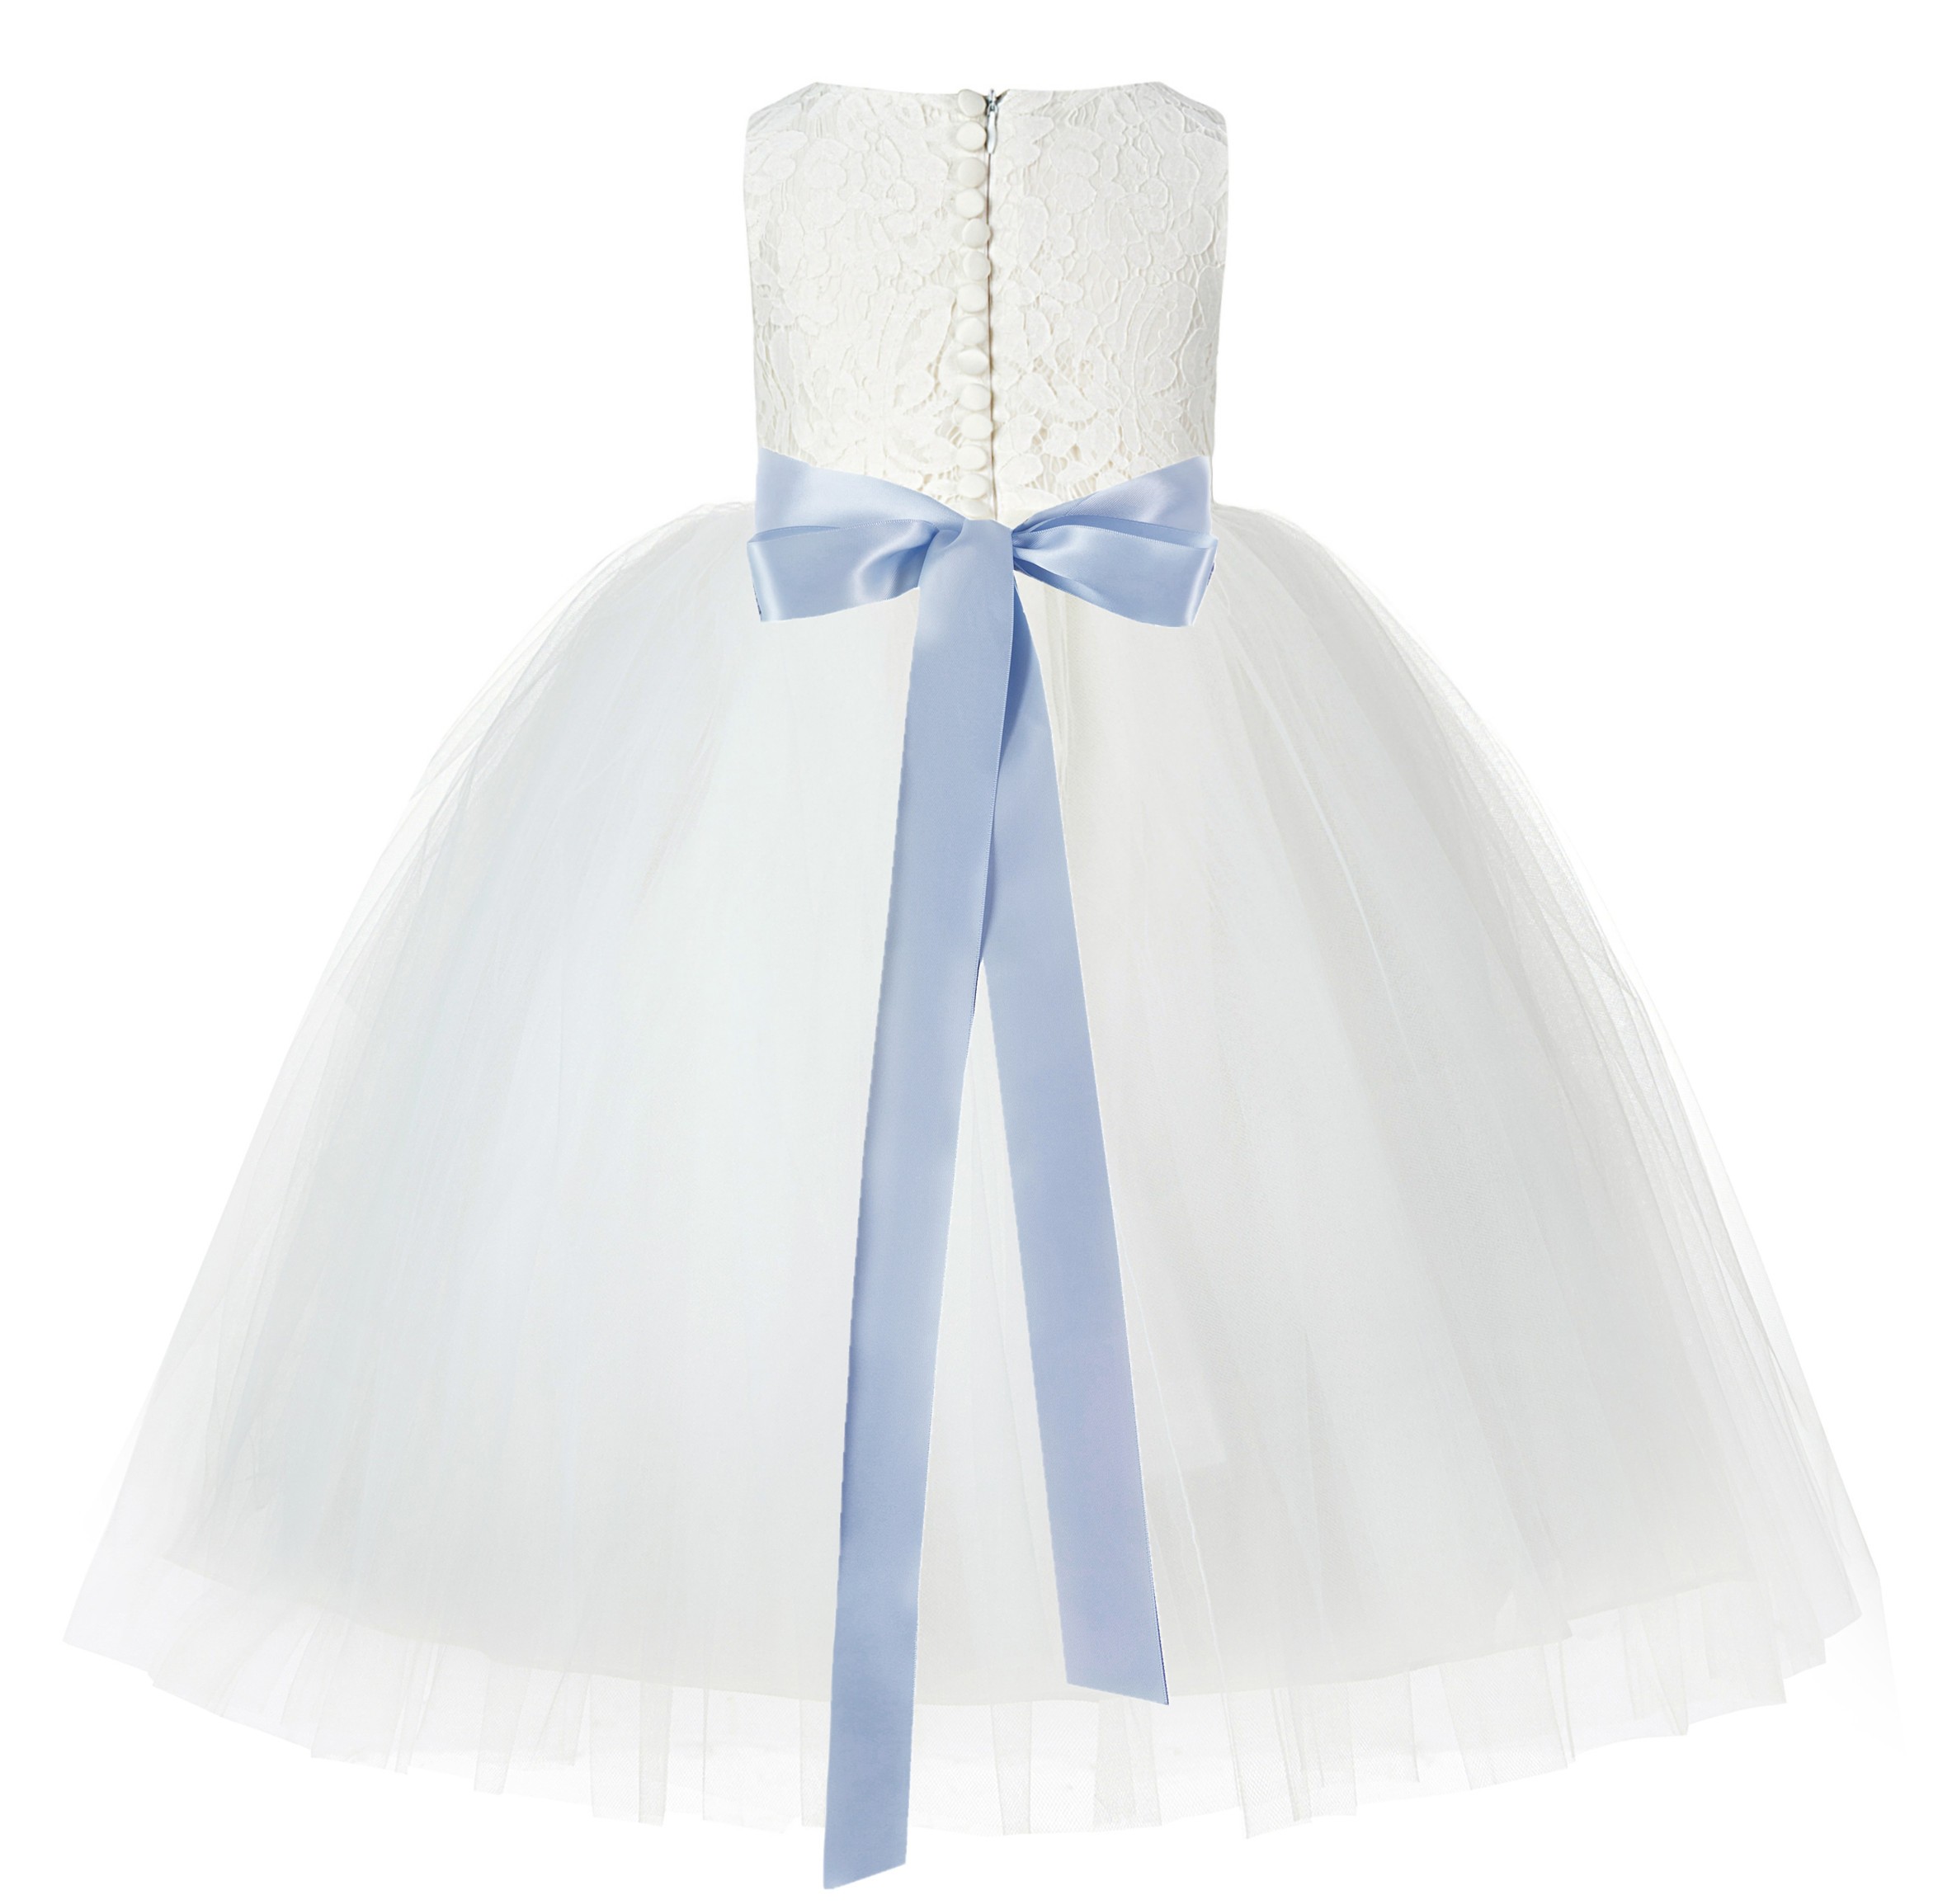 Ivory / Dusty Blue Floral Lace Flower Girl Dress Ivory Ball Gown Lg7